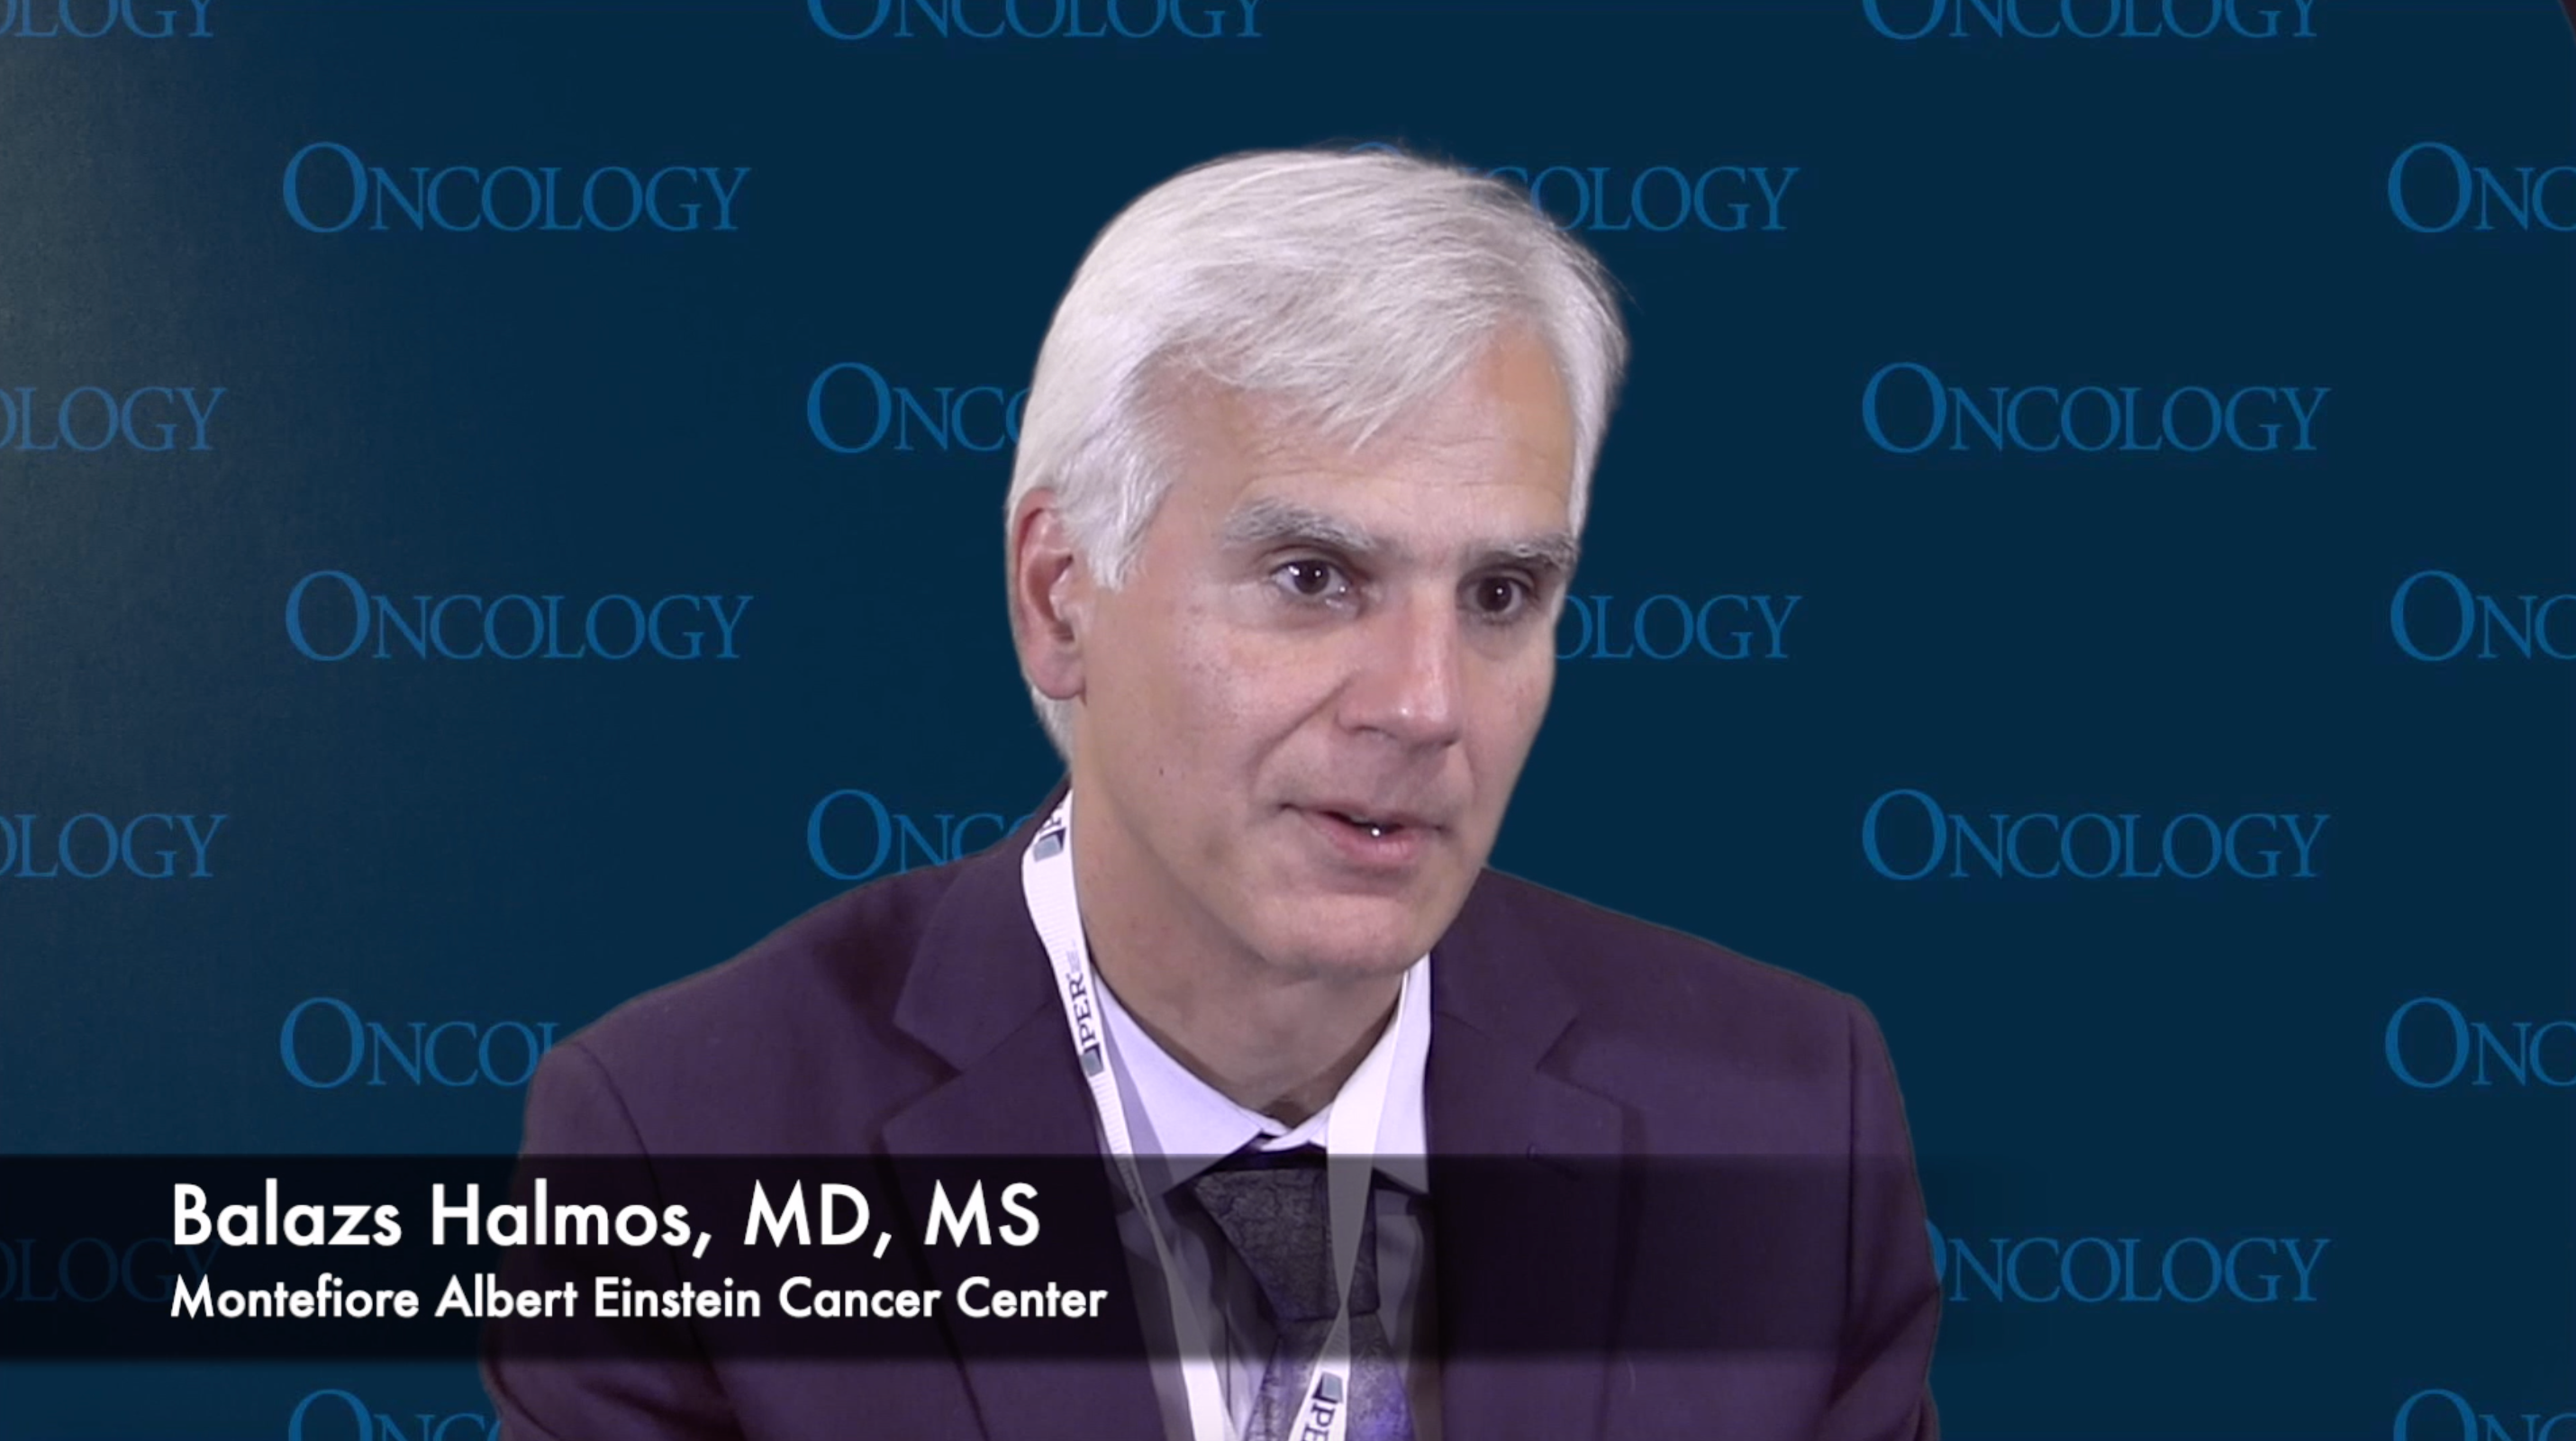 Balazs Halmos, MD, MS, Discusses Metastatic Non-Small Cell Lung Cancer Advancements